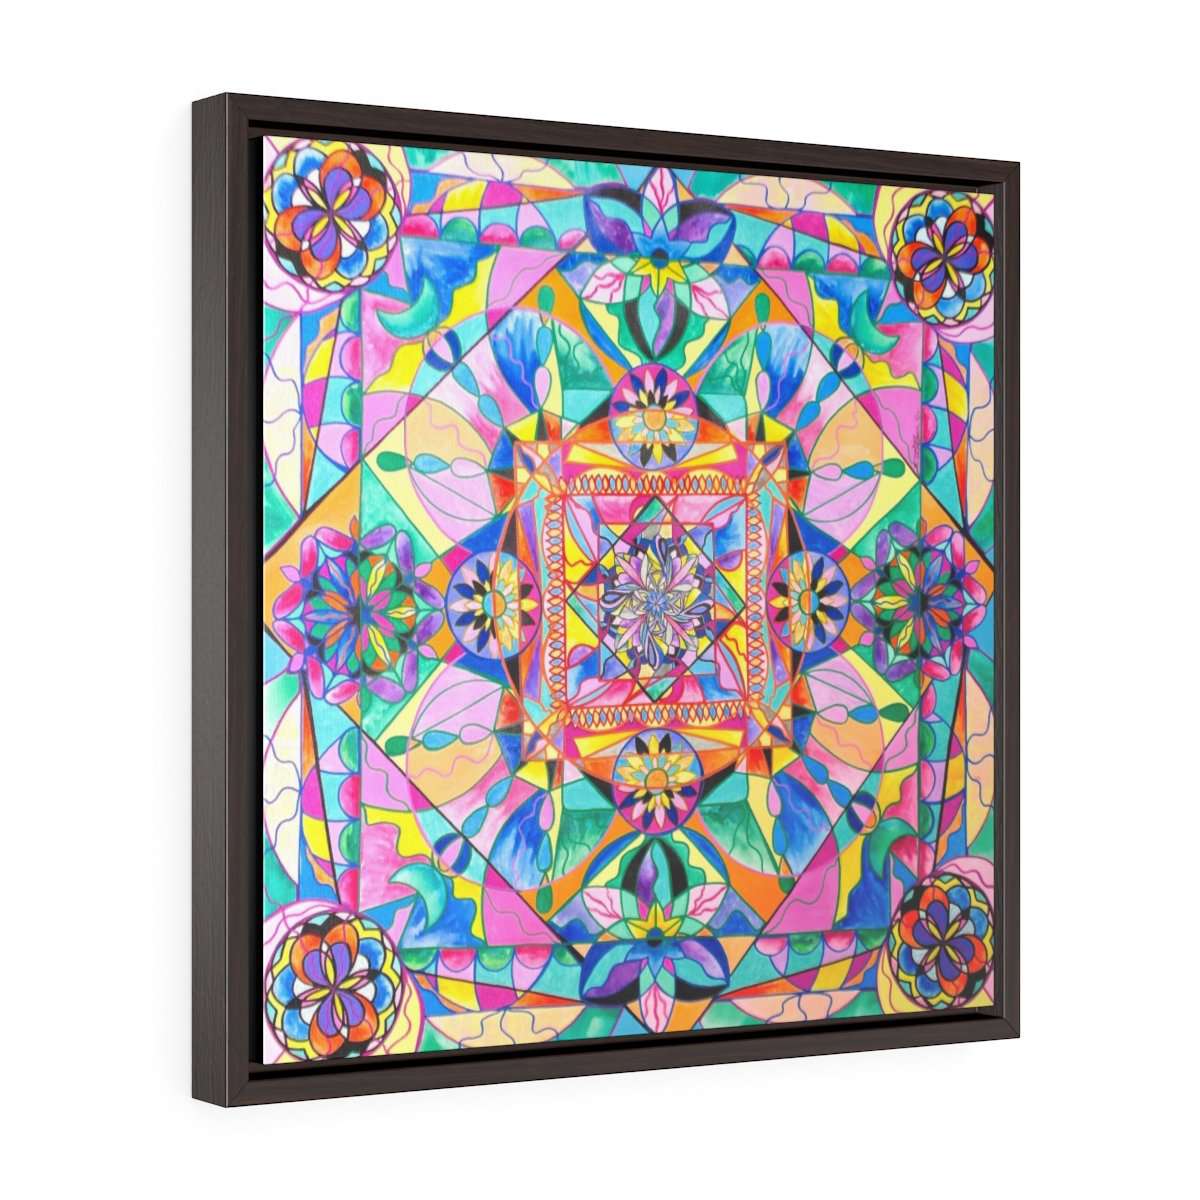 we-believe-in-helping-you-find-the-perfect-renewal-square-framed-premium-gallery-wrap-canvas-hot-on-sale_3.jpg